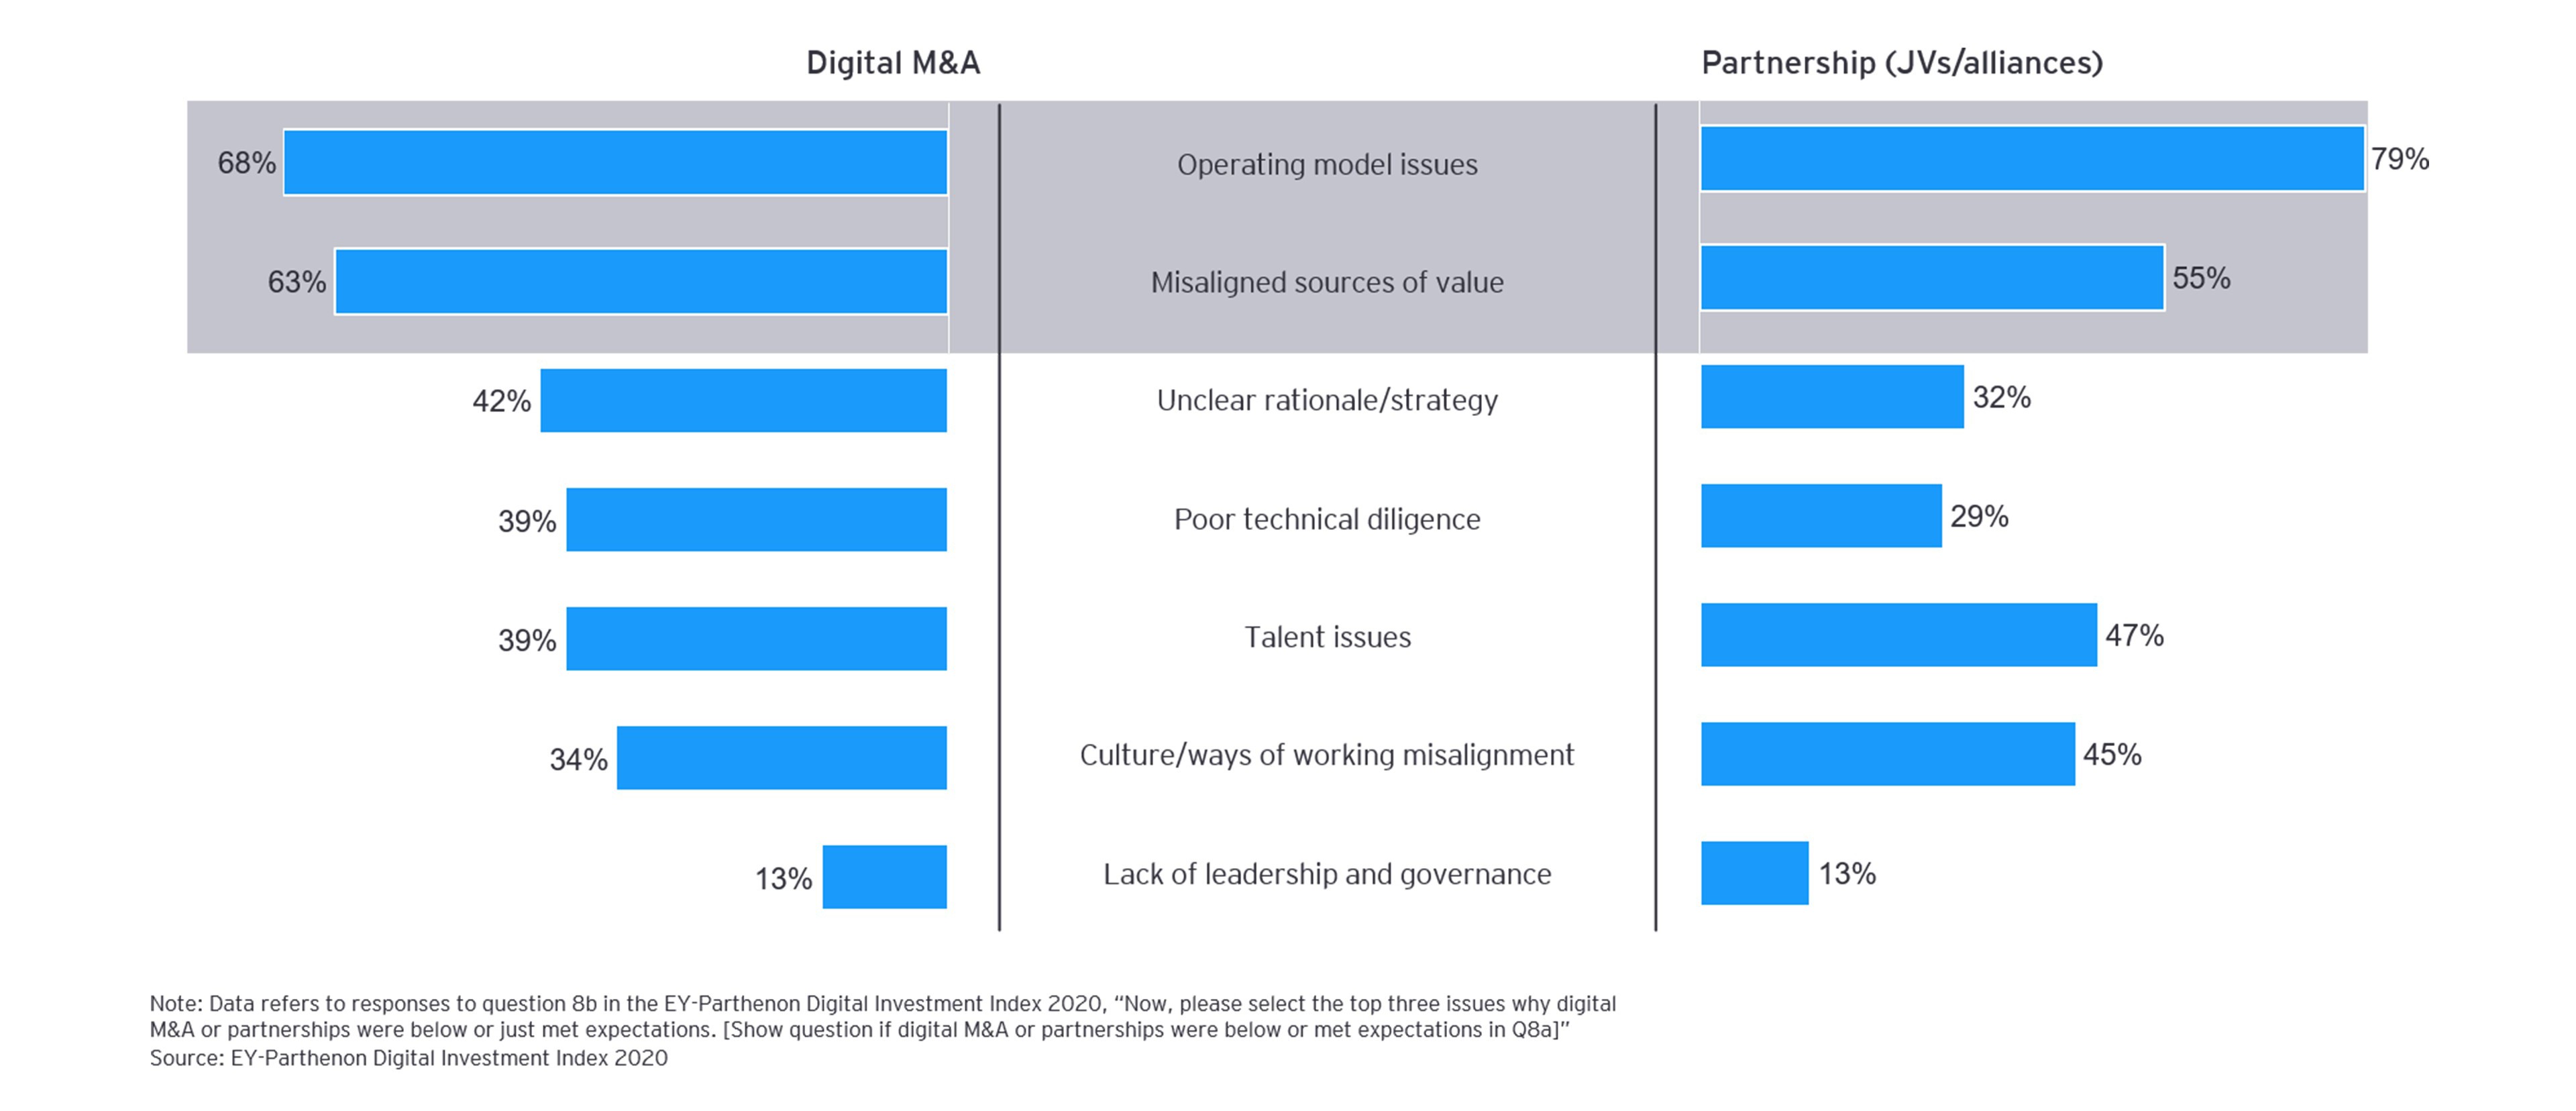 Top challenges in digital M&A and partnerships, per Life Sciences Digital Investment Index (DII) survey